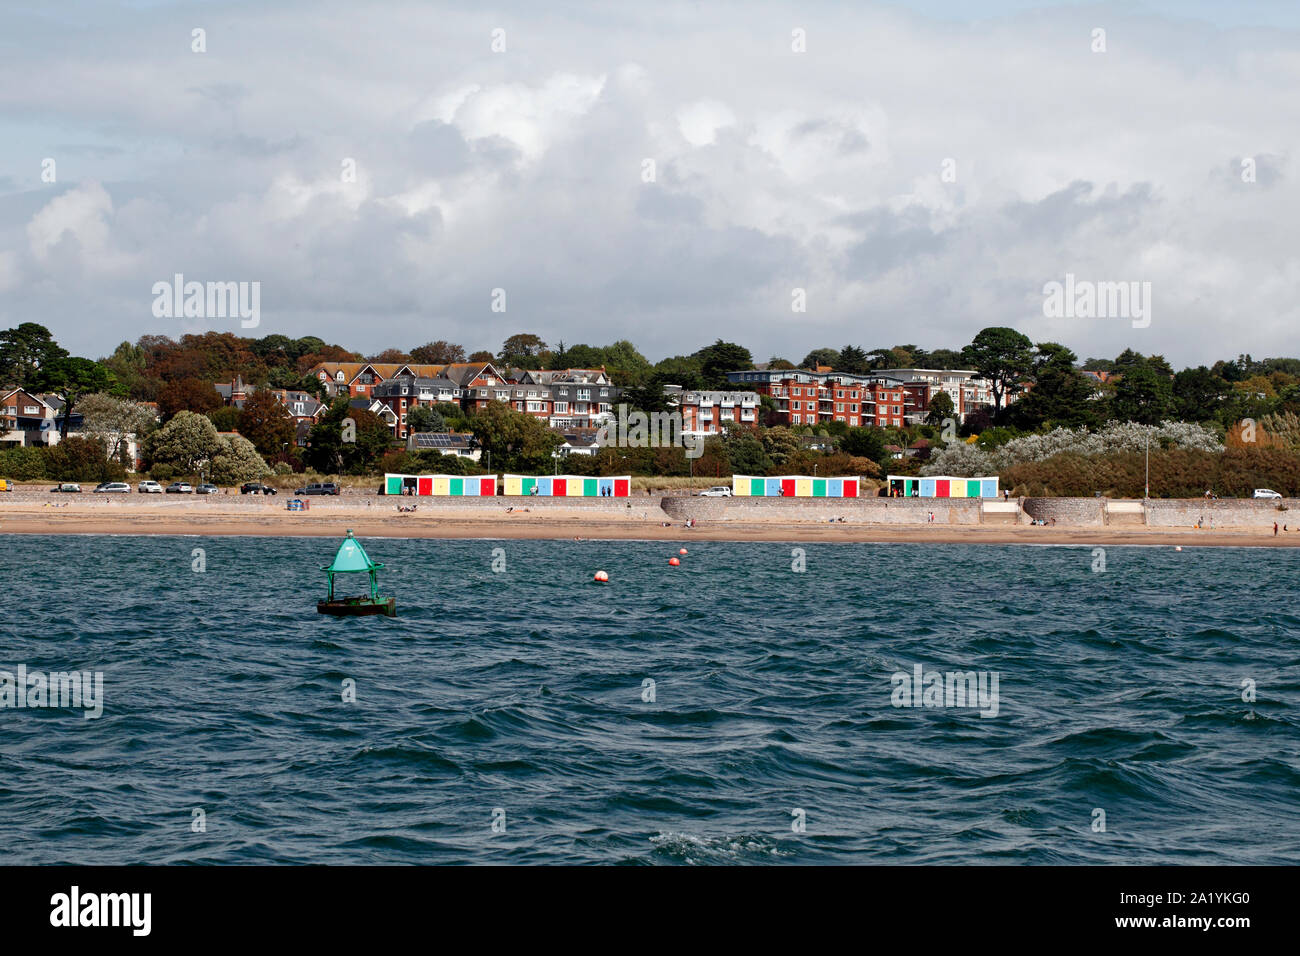 Exmouth seafront with beach huts. Stock Photo